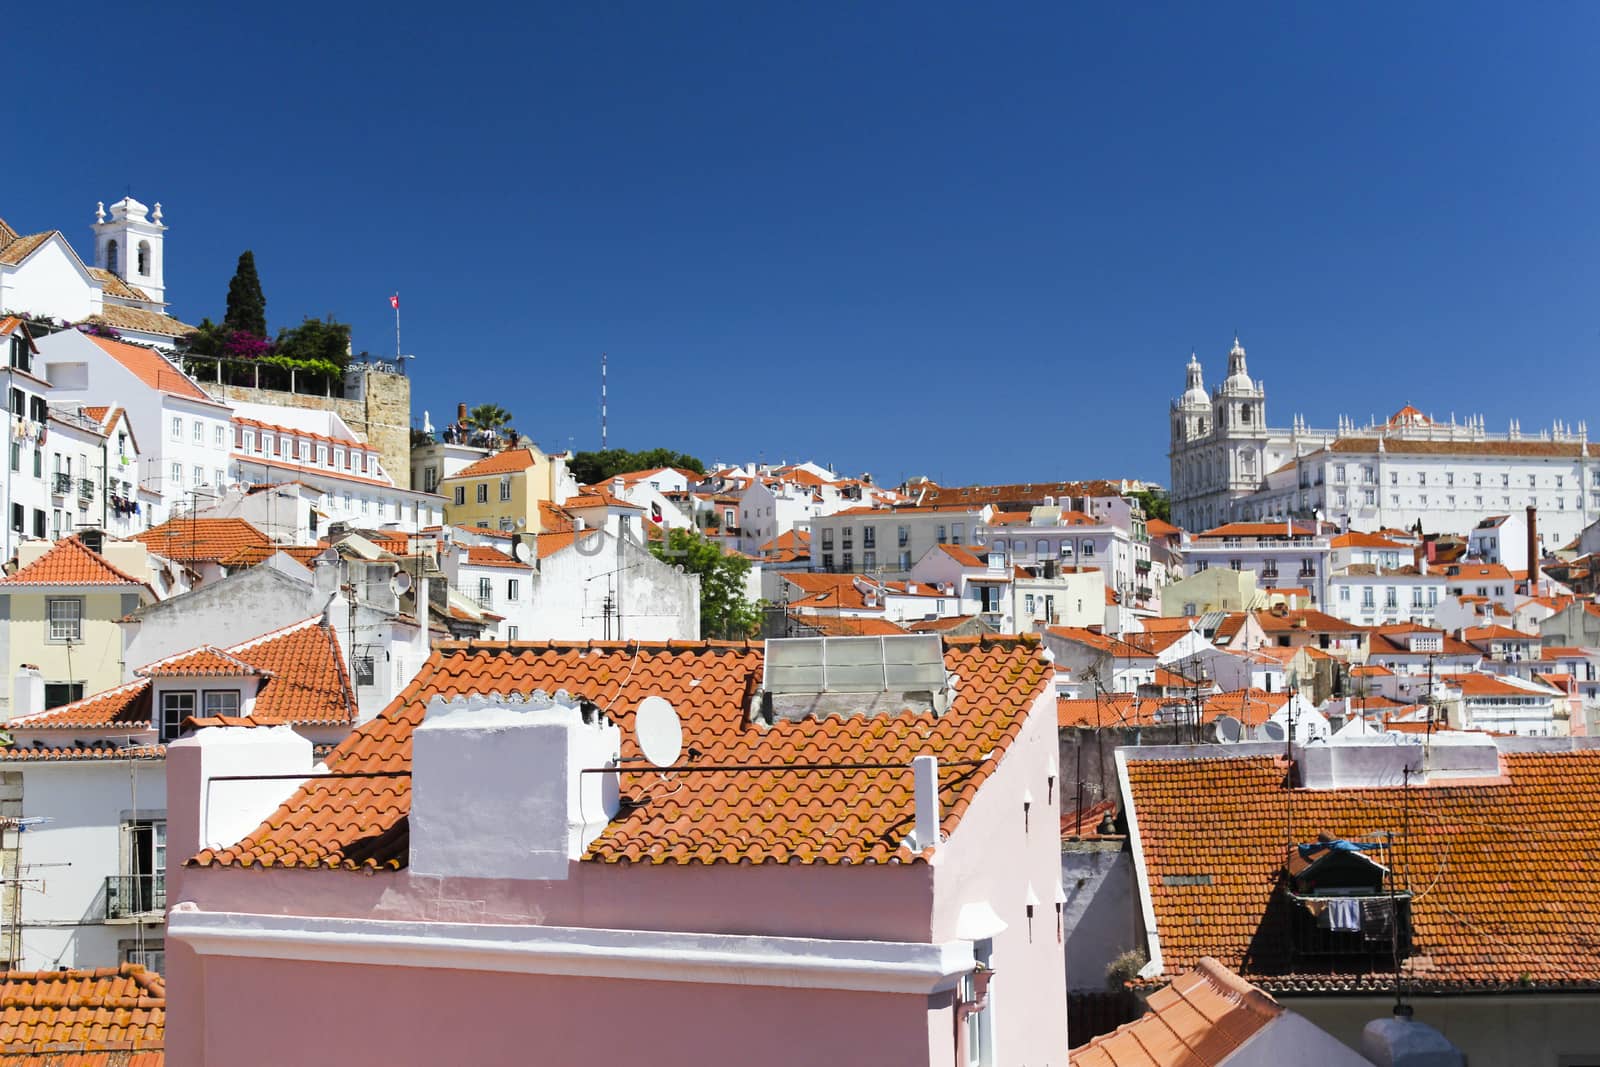 Vibrant rooftops of Alfama district in Lisbon in late spring